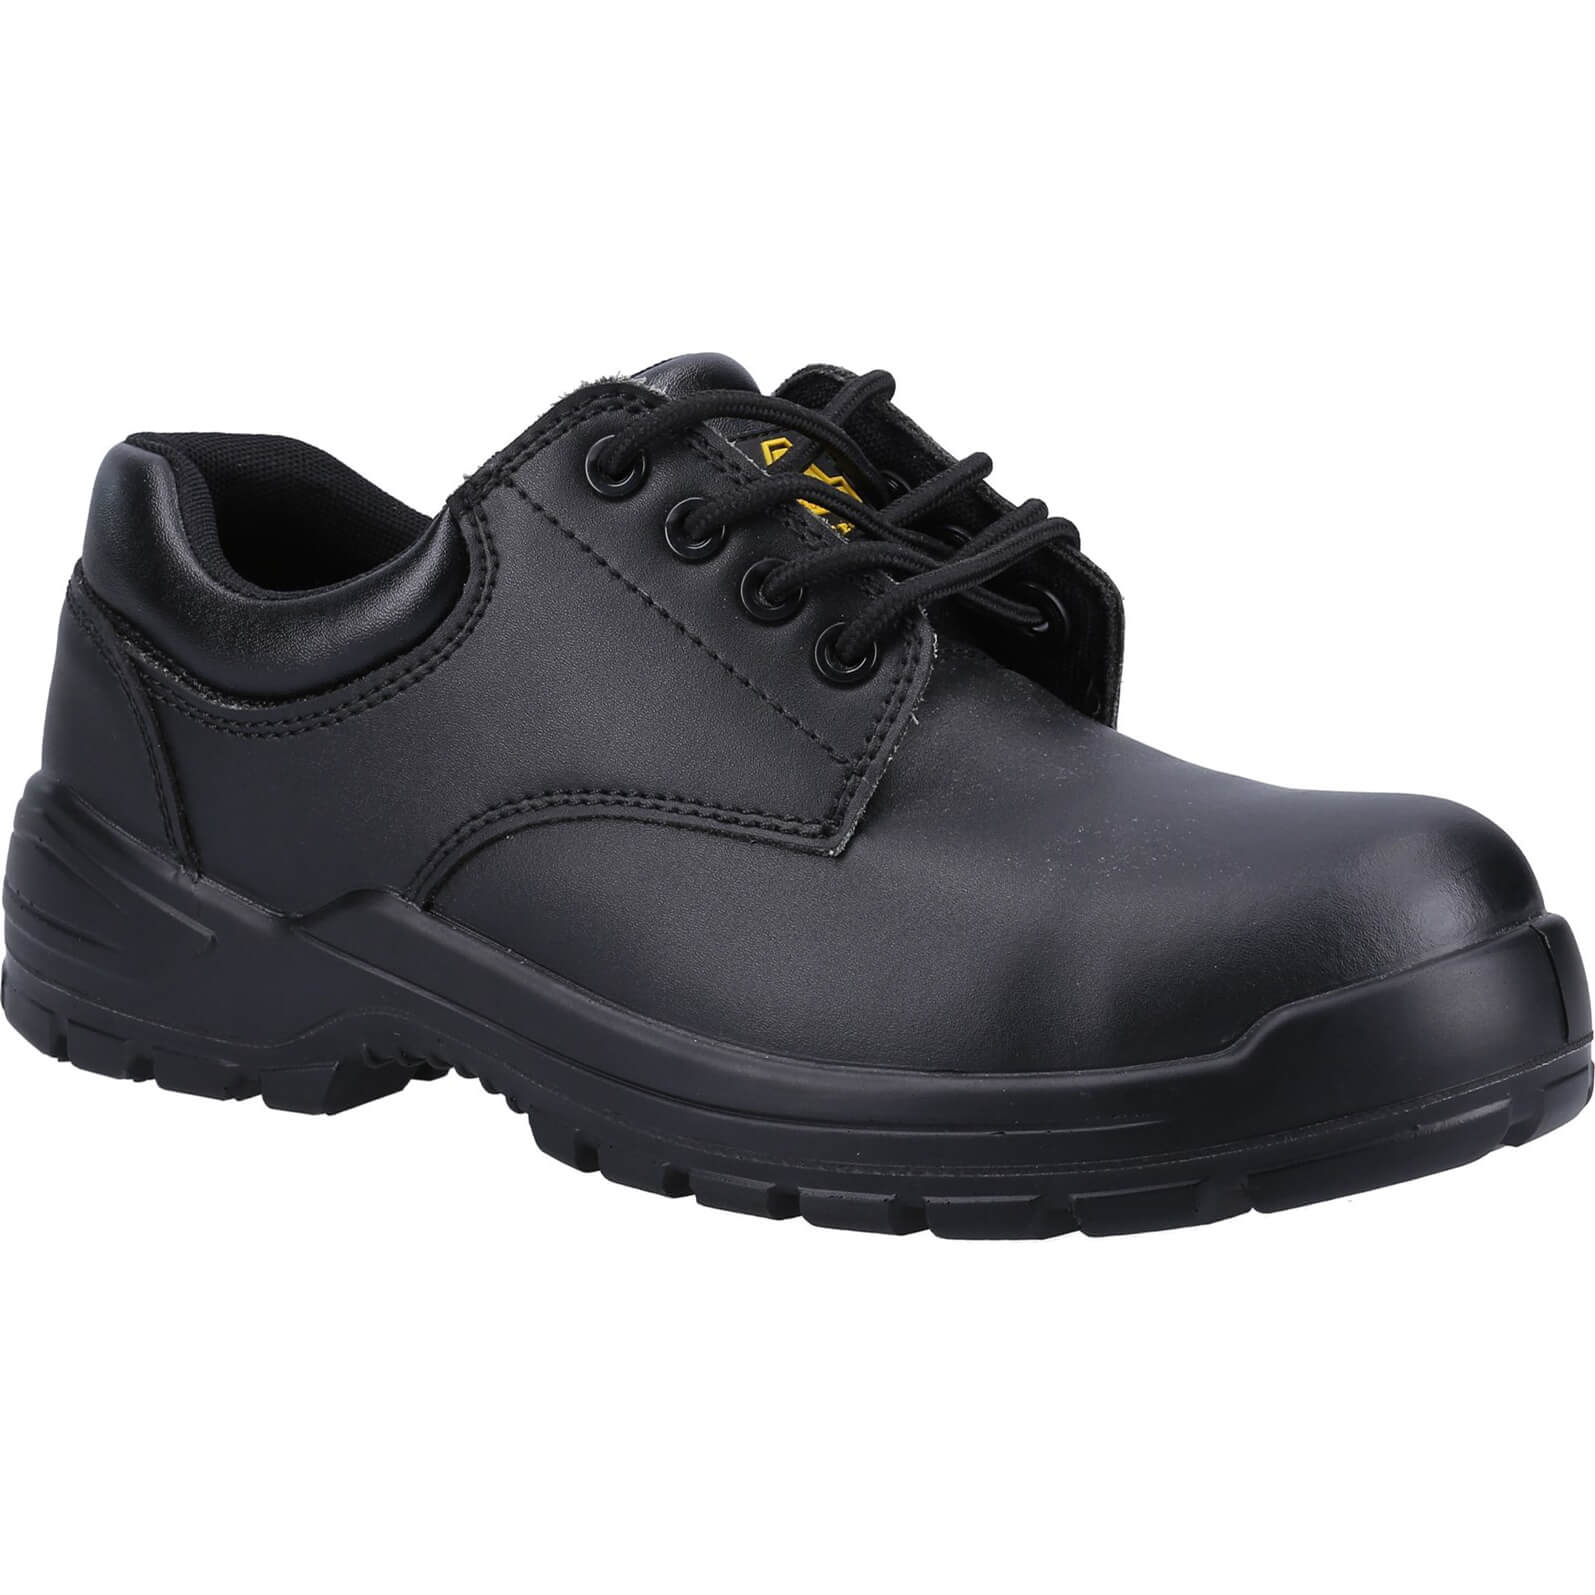 Image of Amblers Safety FS38C Metal Free Composite Gibson Lace Safety Shoe Black Size 11